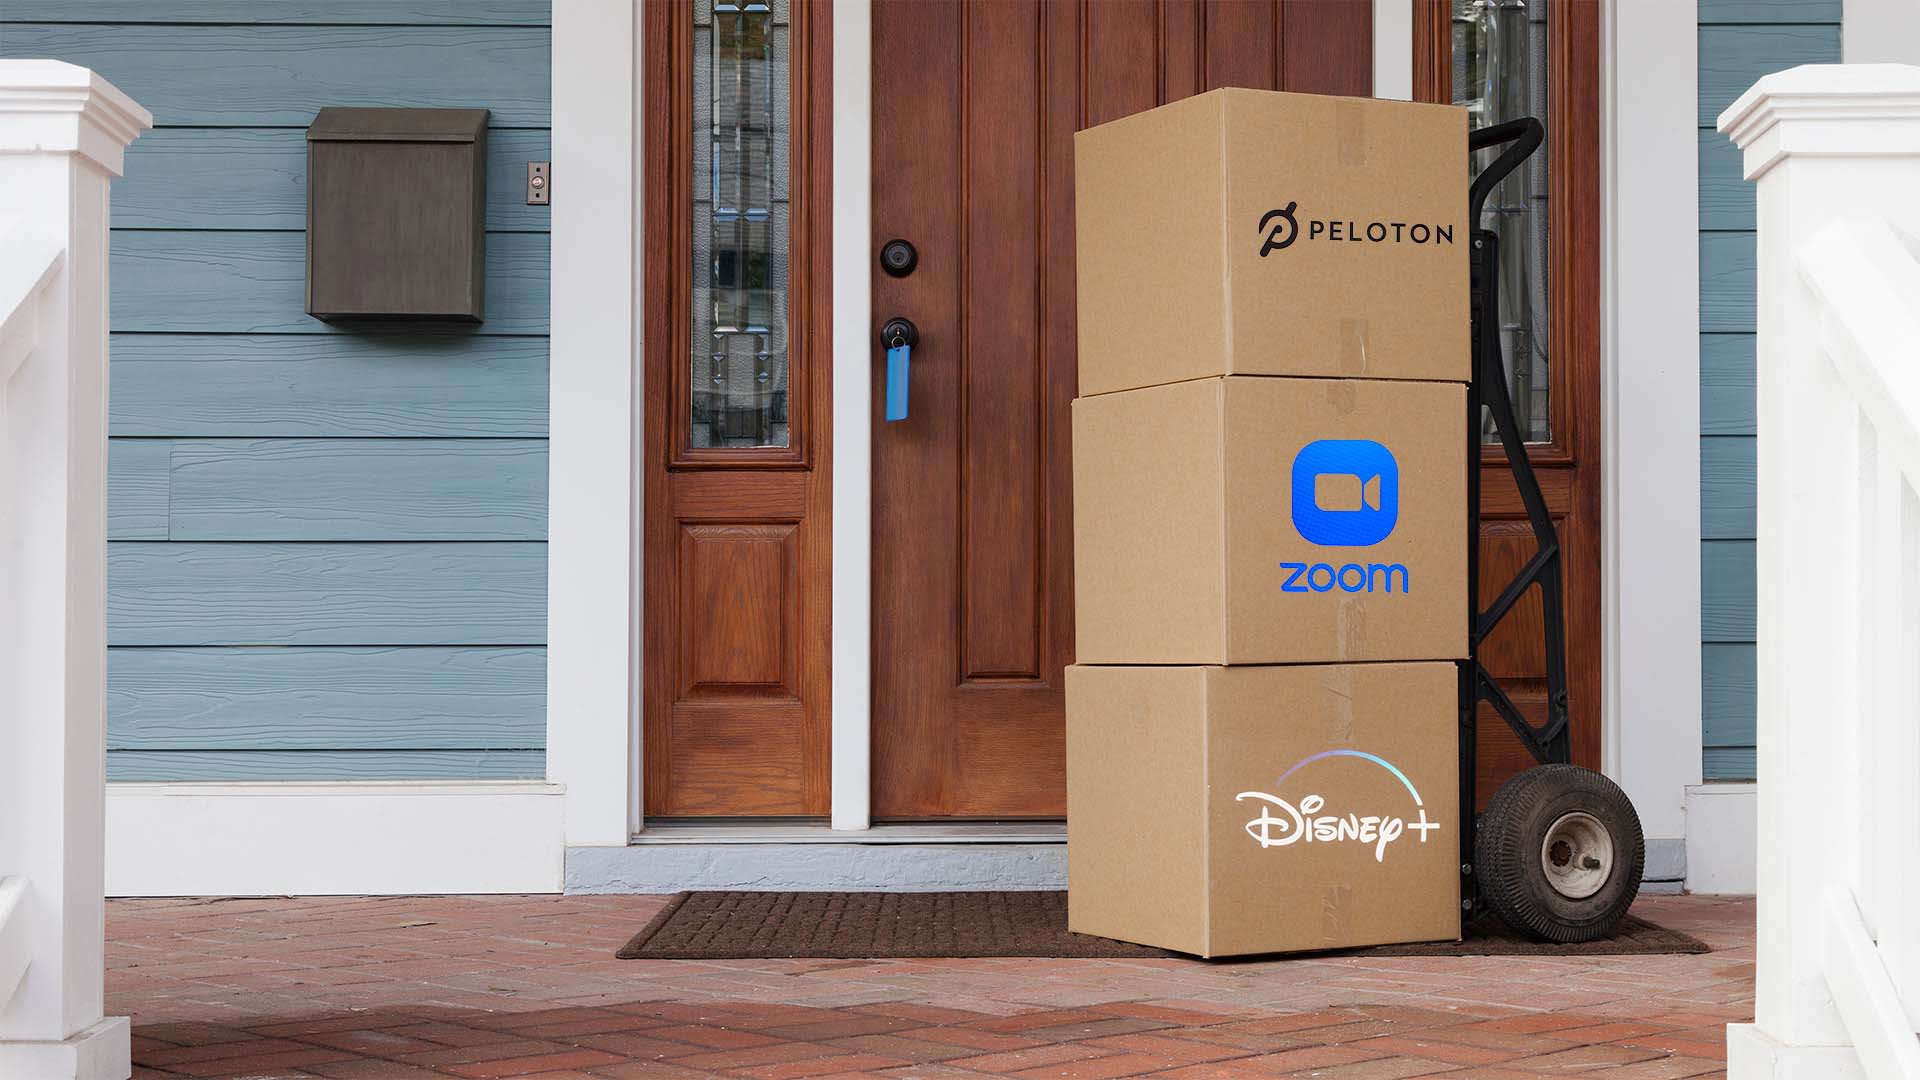 What Disney+, Peloton, and Zoom Can Teach Your Business About D2C